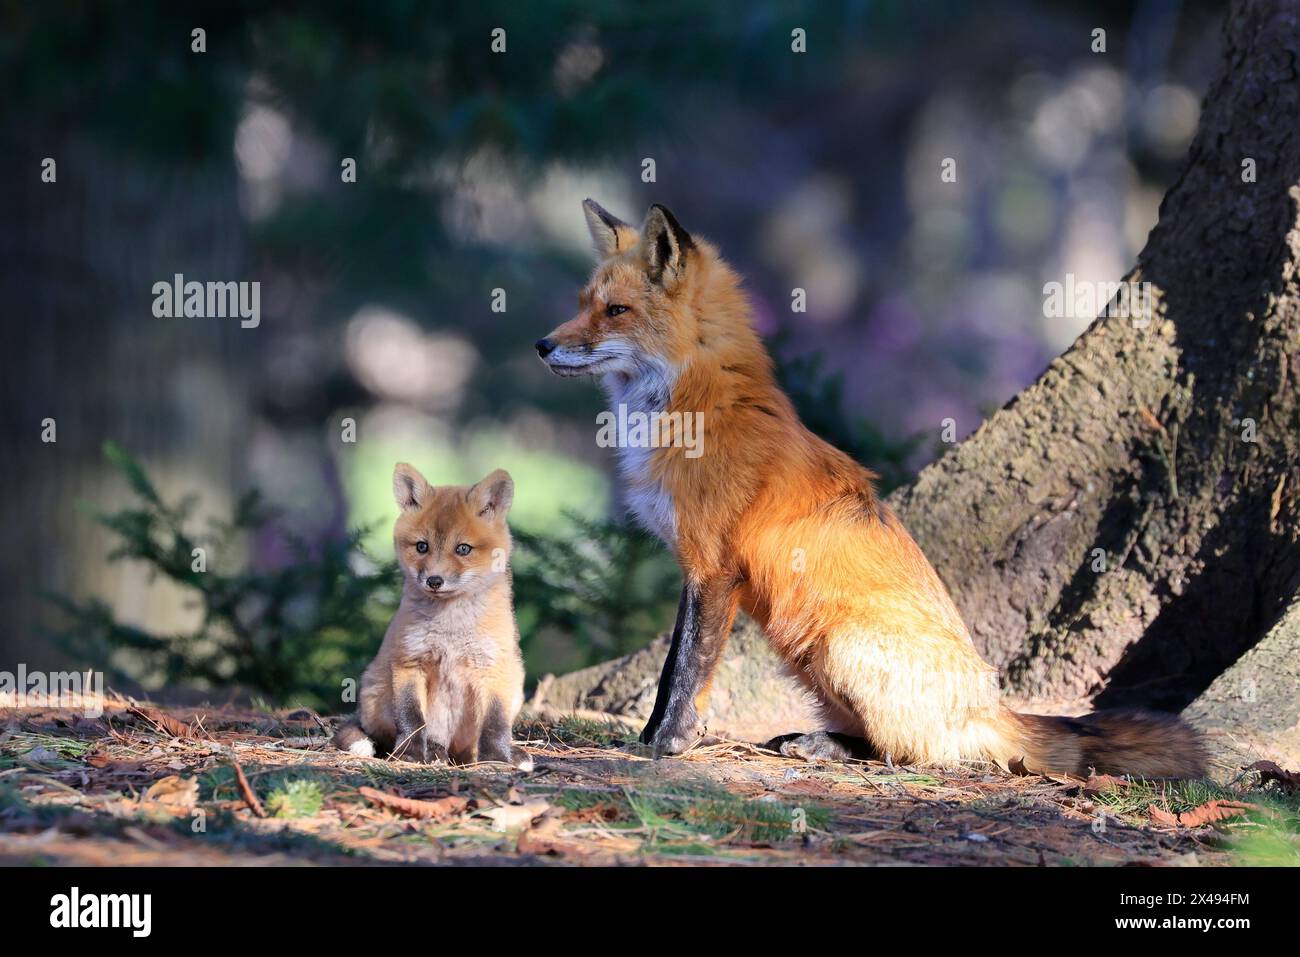 Portrait of mother red fox and her baby in the forest, Canada Stock Photo